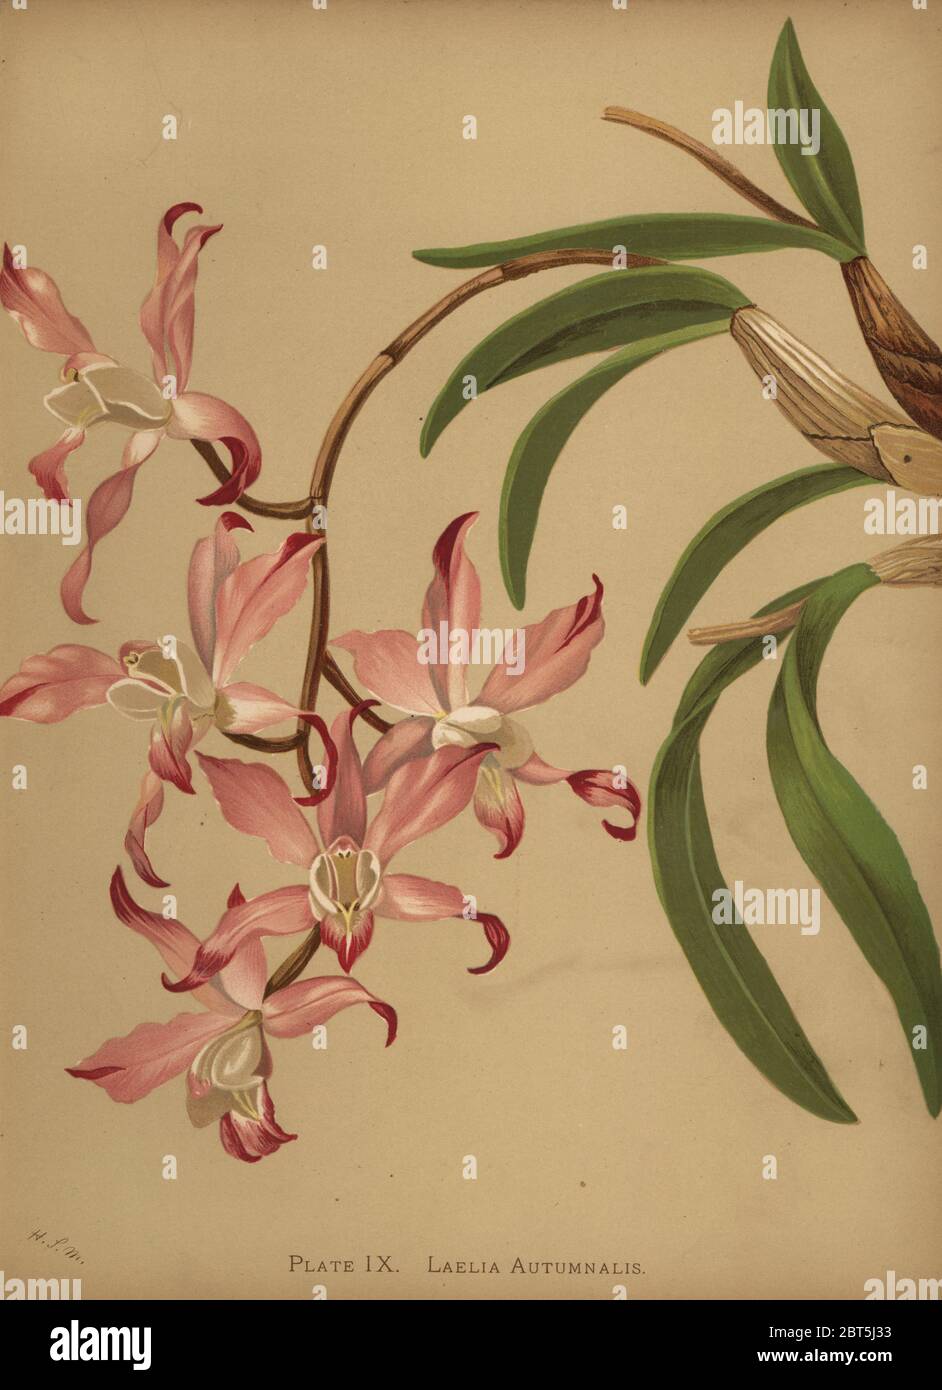 Autumn laelia orchid, Laelia autumnalis. Chromolithograph by Hatch Company after a botanical illustration by Harriet Stewart Miner from Orchids, the Royal Family of Plants, Lee & Shepard, Boston, 1885. The first American color plate book on orchids by woman botanist Miner. Stock Photo